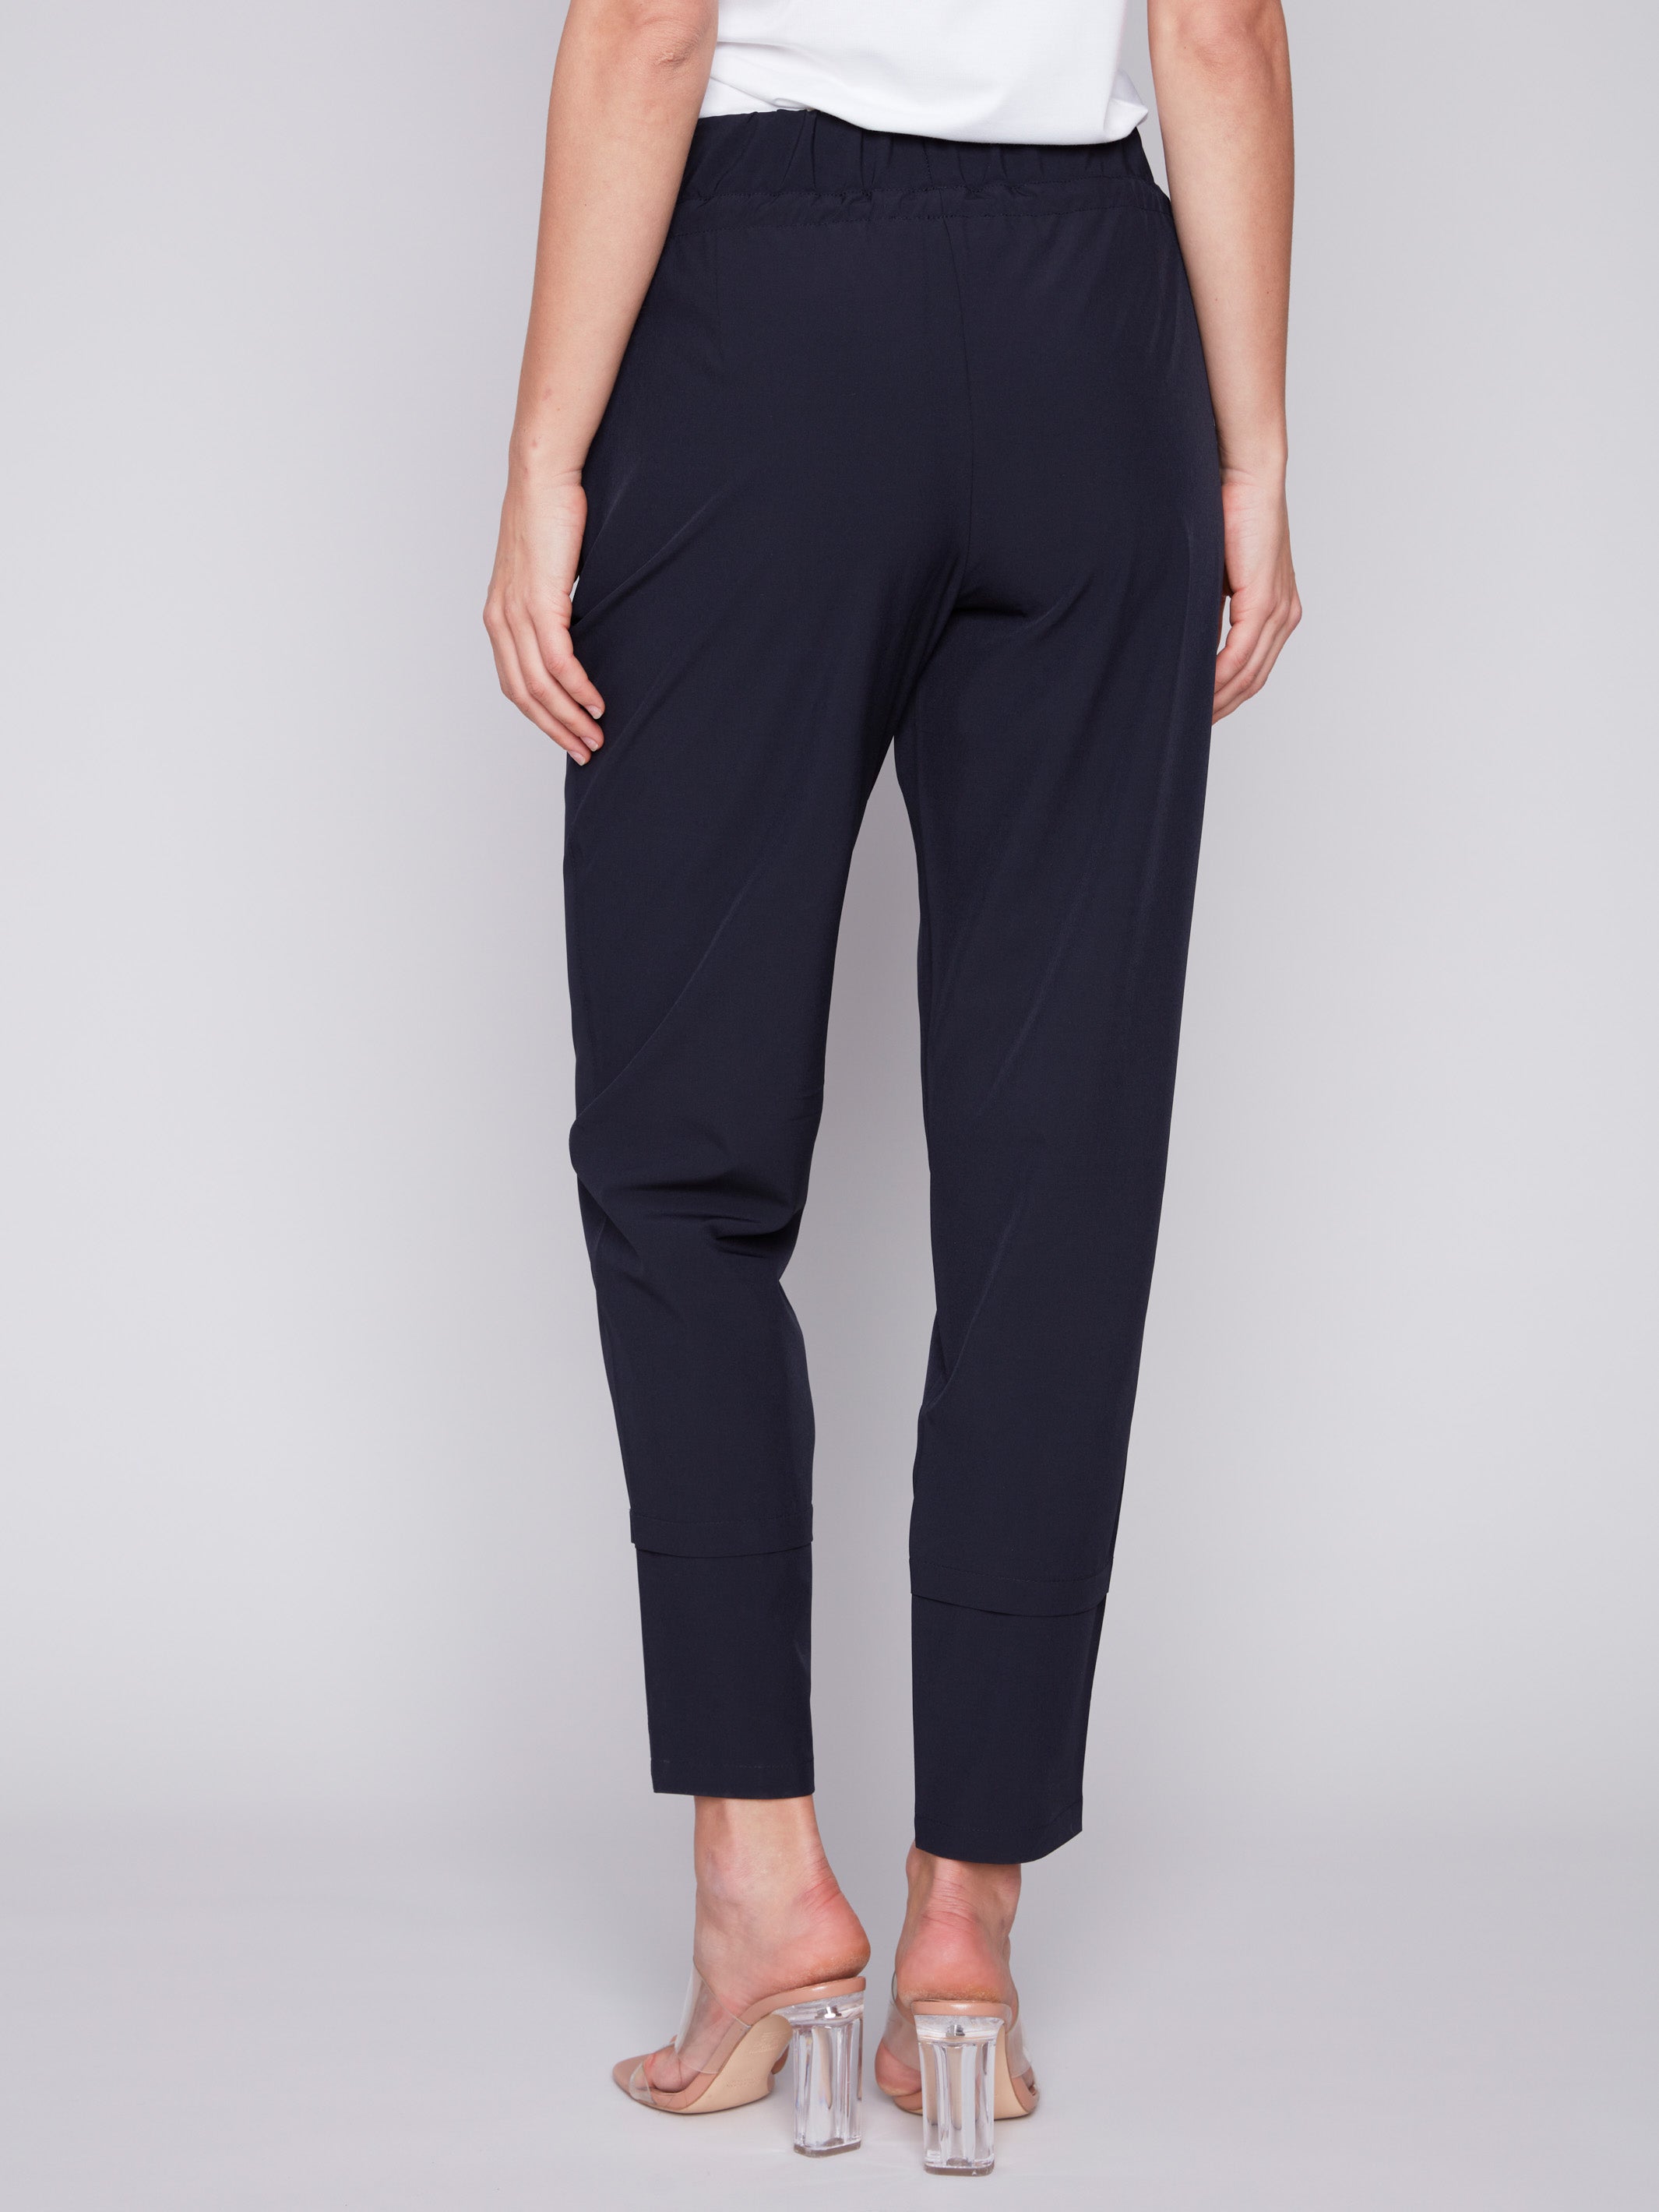 Techno Pants - Navy - Charlie B Collection Canada - Image 3